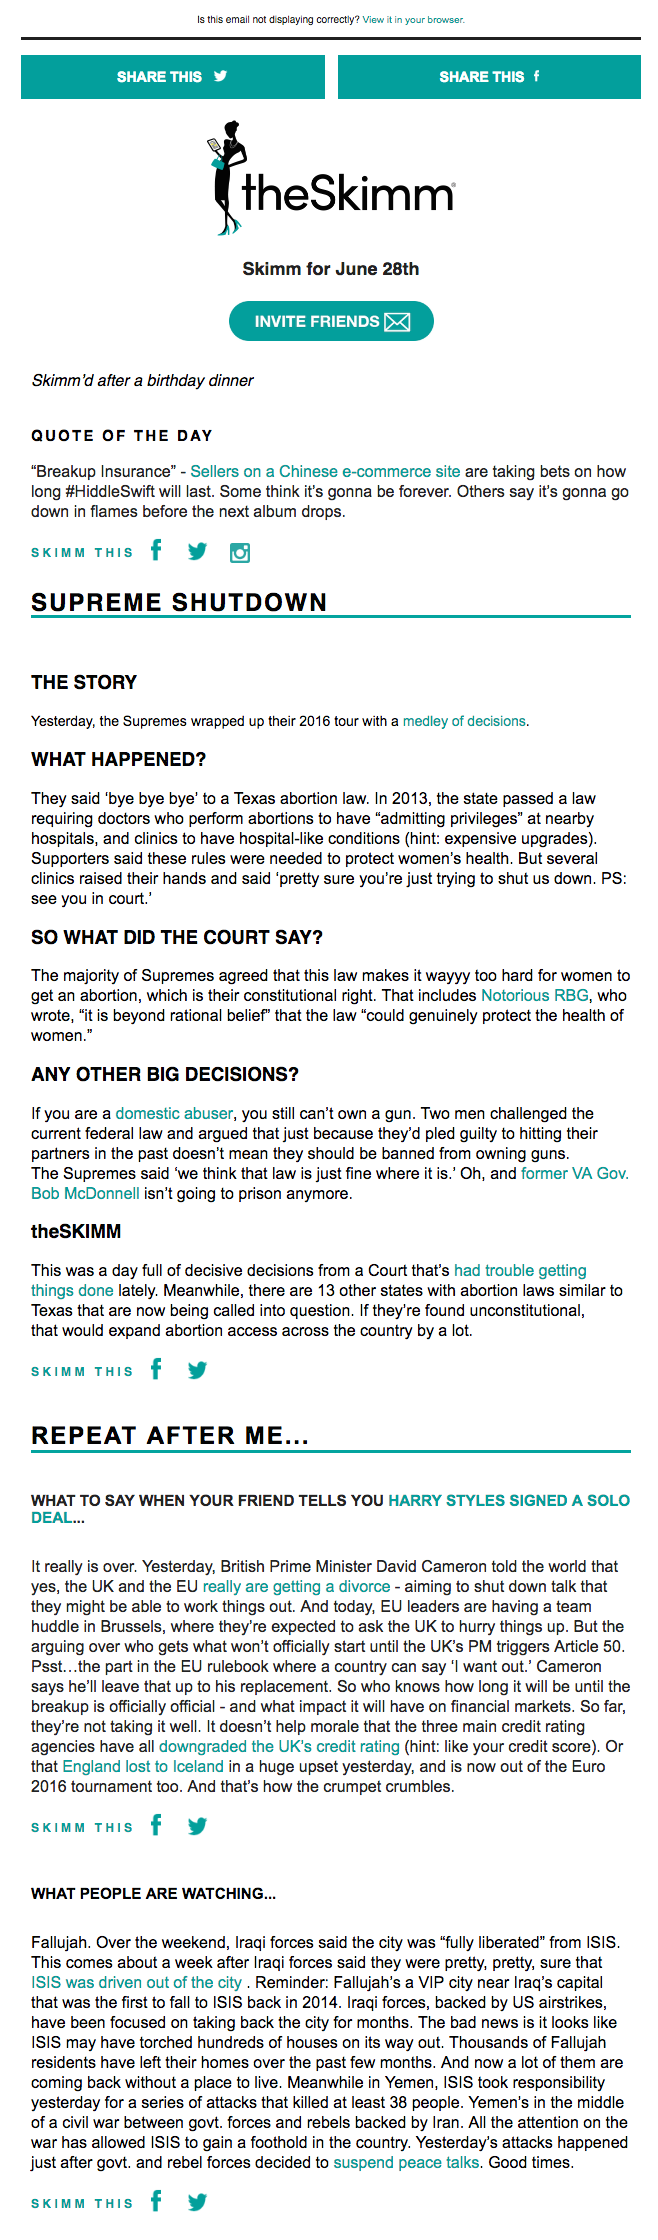 Email Newsletter Example: theSkimm